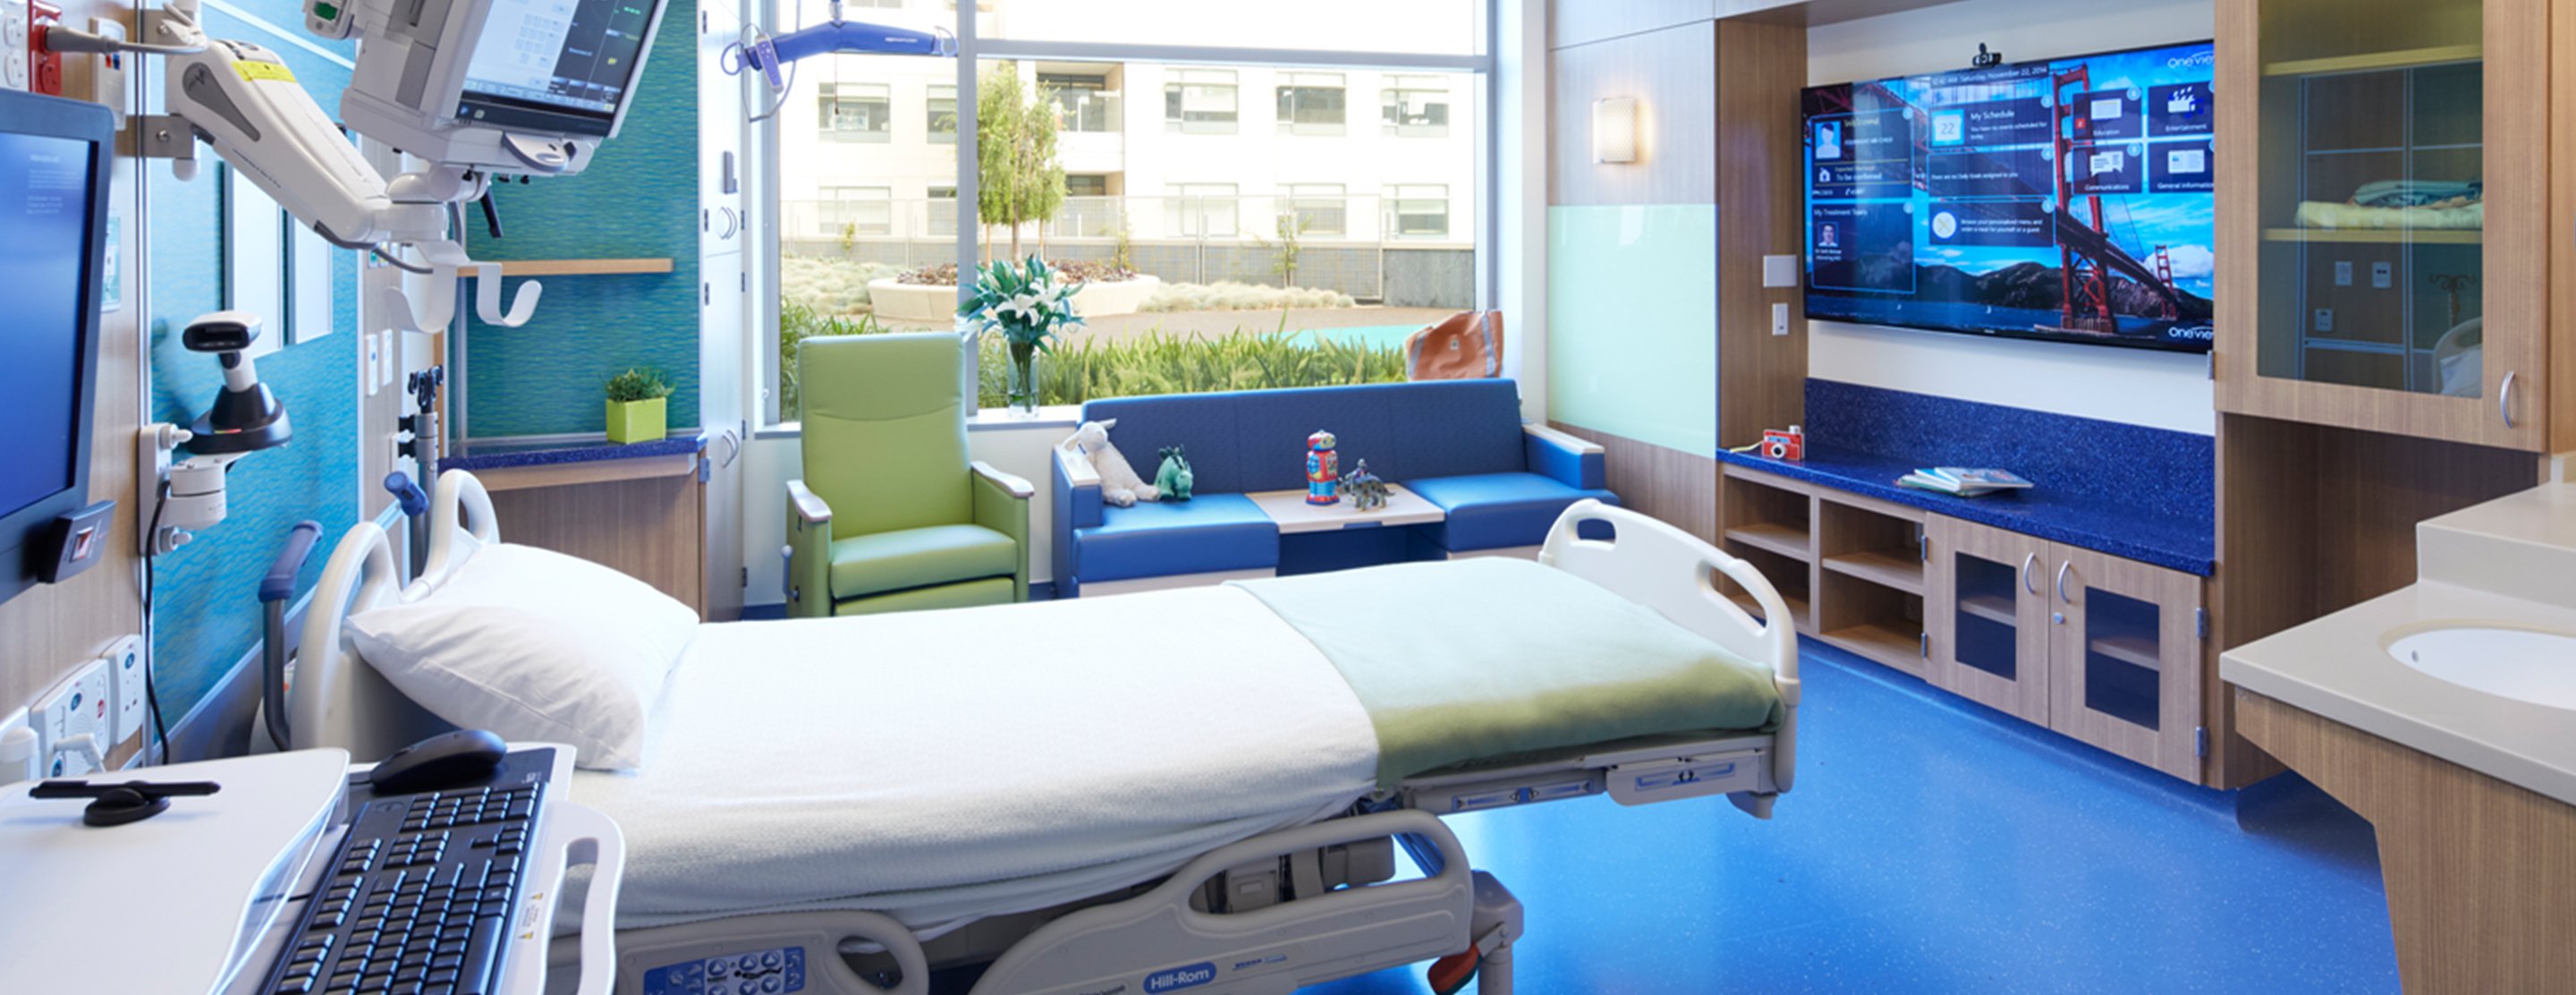 patient-rooms-in-ucsf-benioff-childrens-hospital-san-francisco-2x